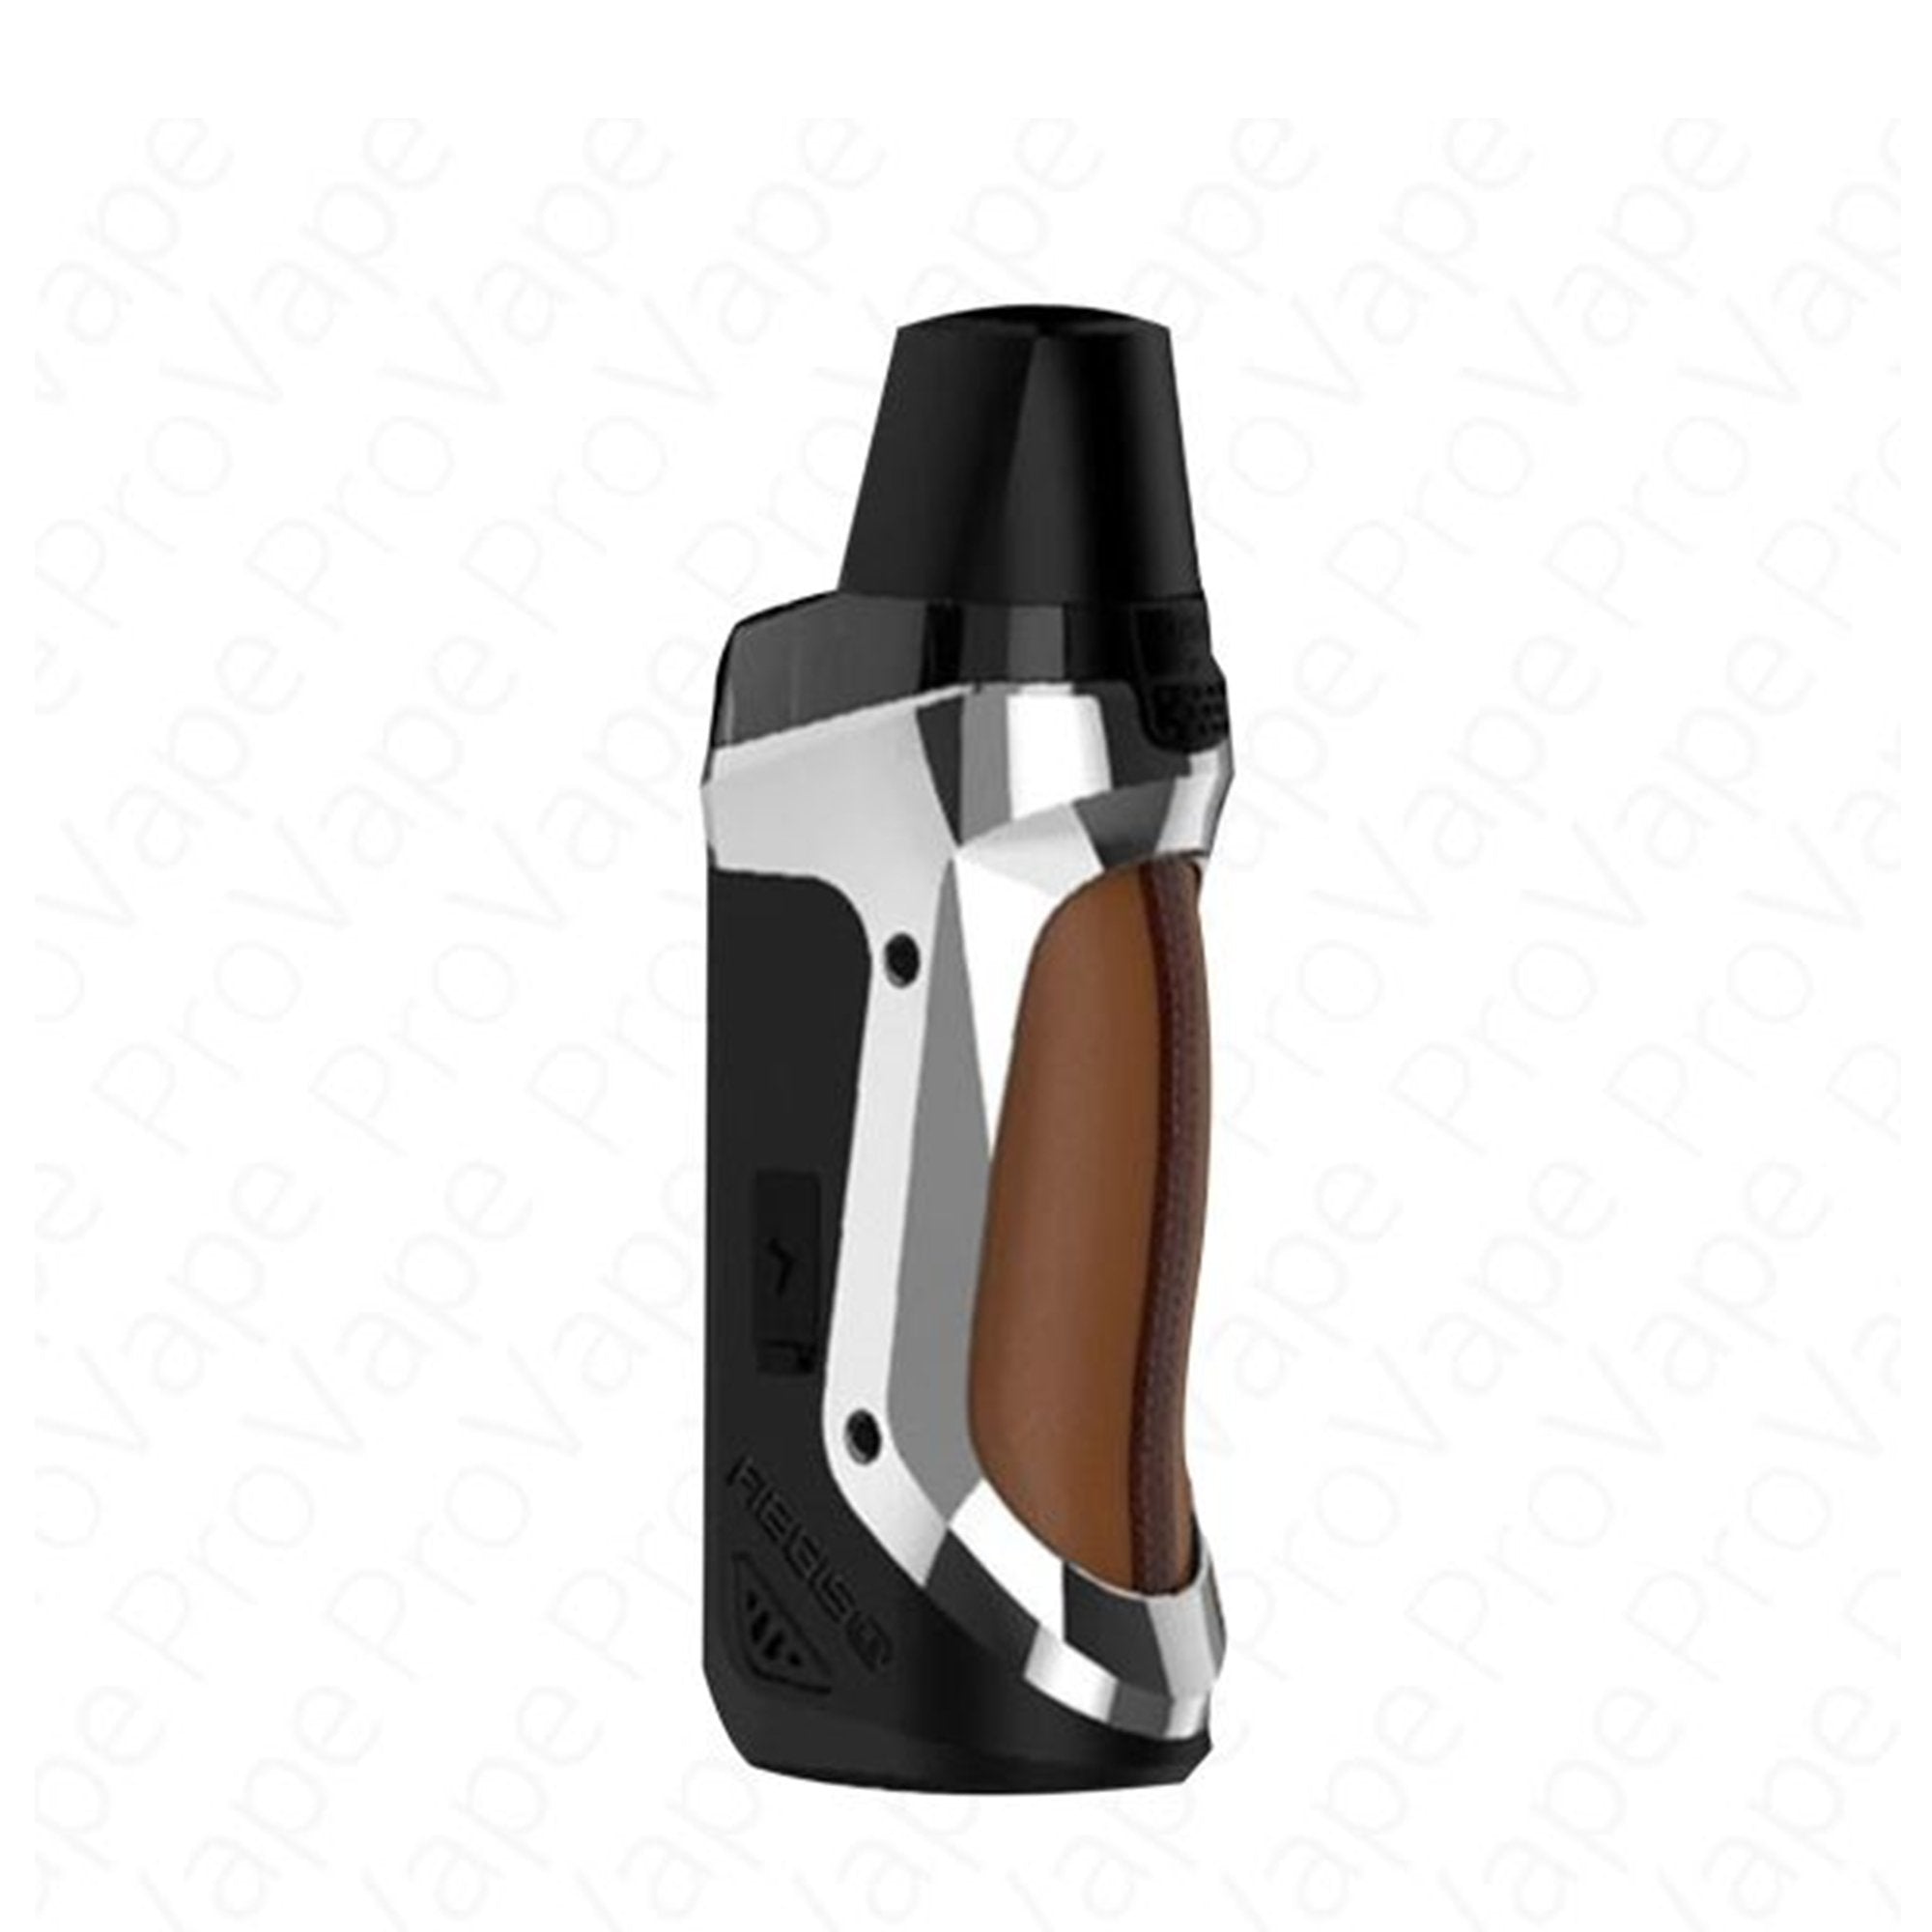 GeekVape Aegis Boost Pod Kit | Luxury Edition | Wolfvapes - Wolfvapes.co.uk-Red